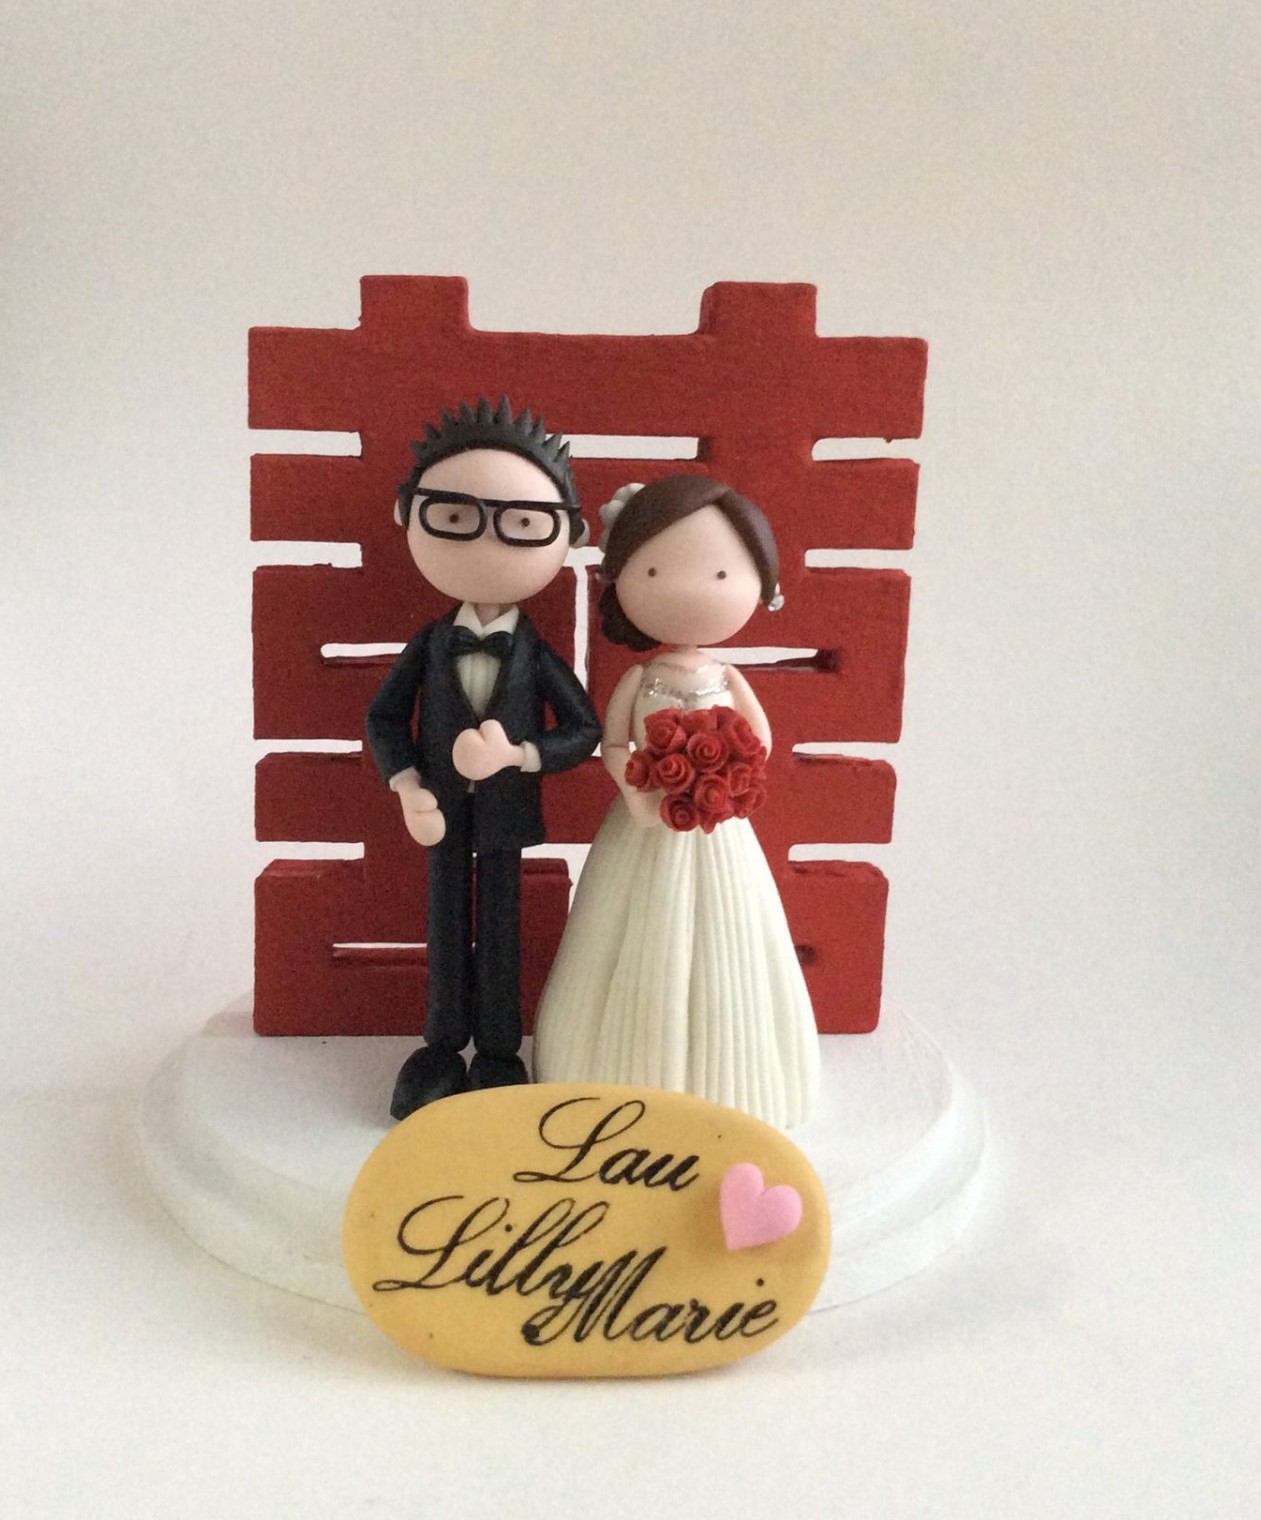 Wedding Cake Topper With Chinese Wording Double Happiness - Not Edible ( Made To Order)